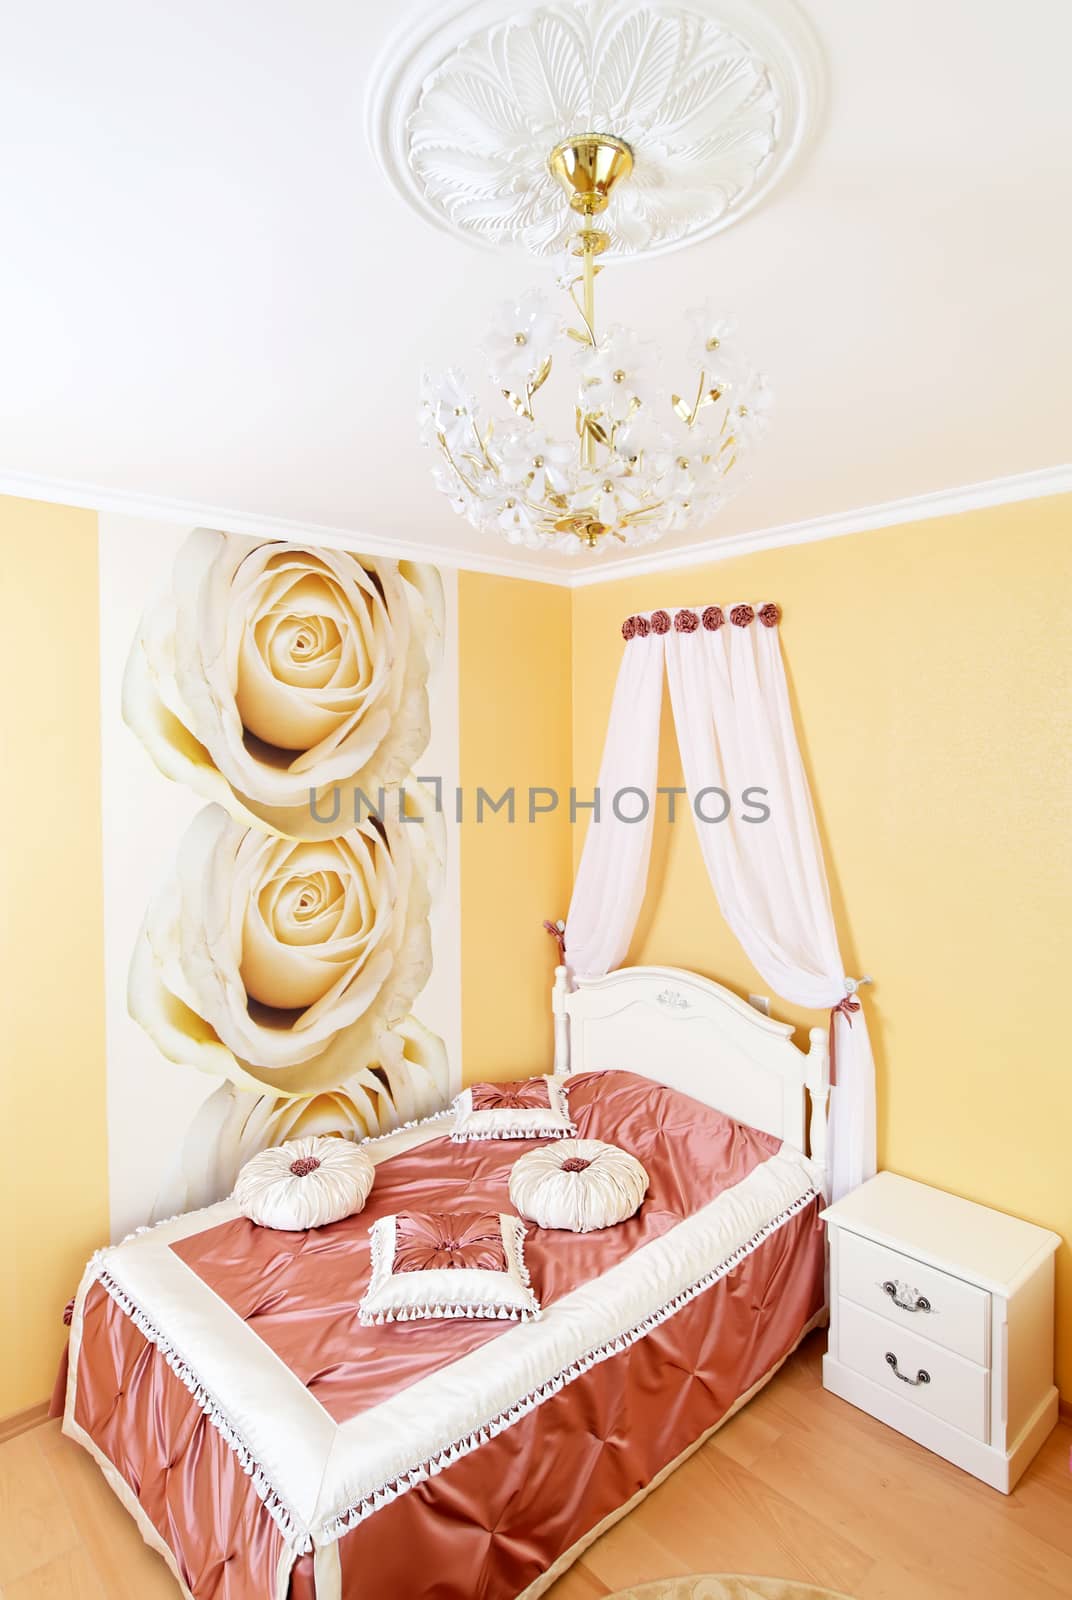 Classical bedroom interior with flowers by RawGroup